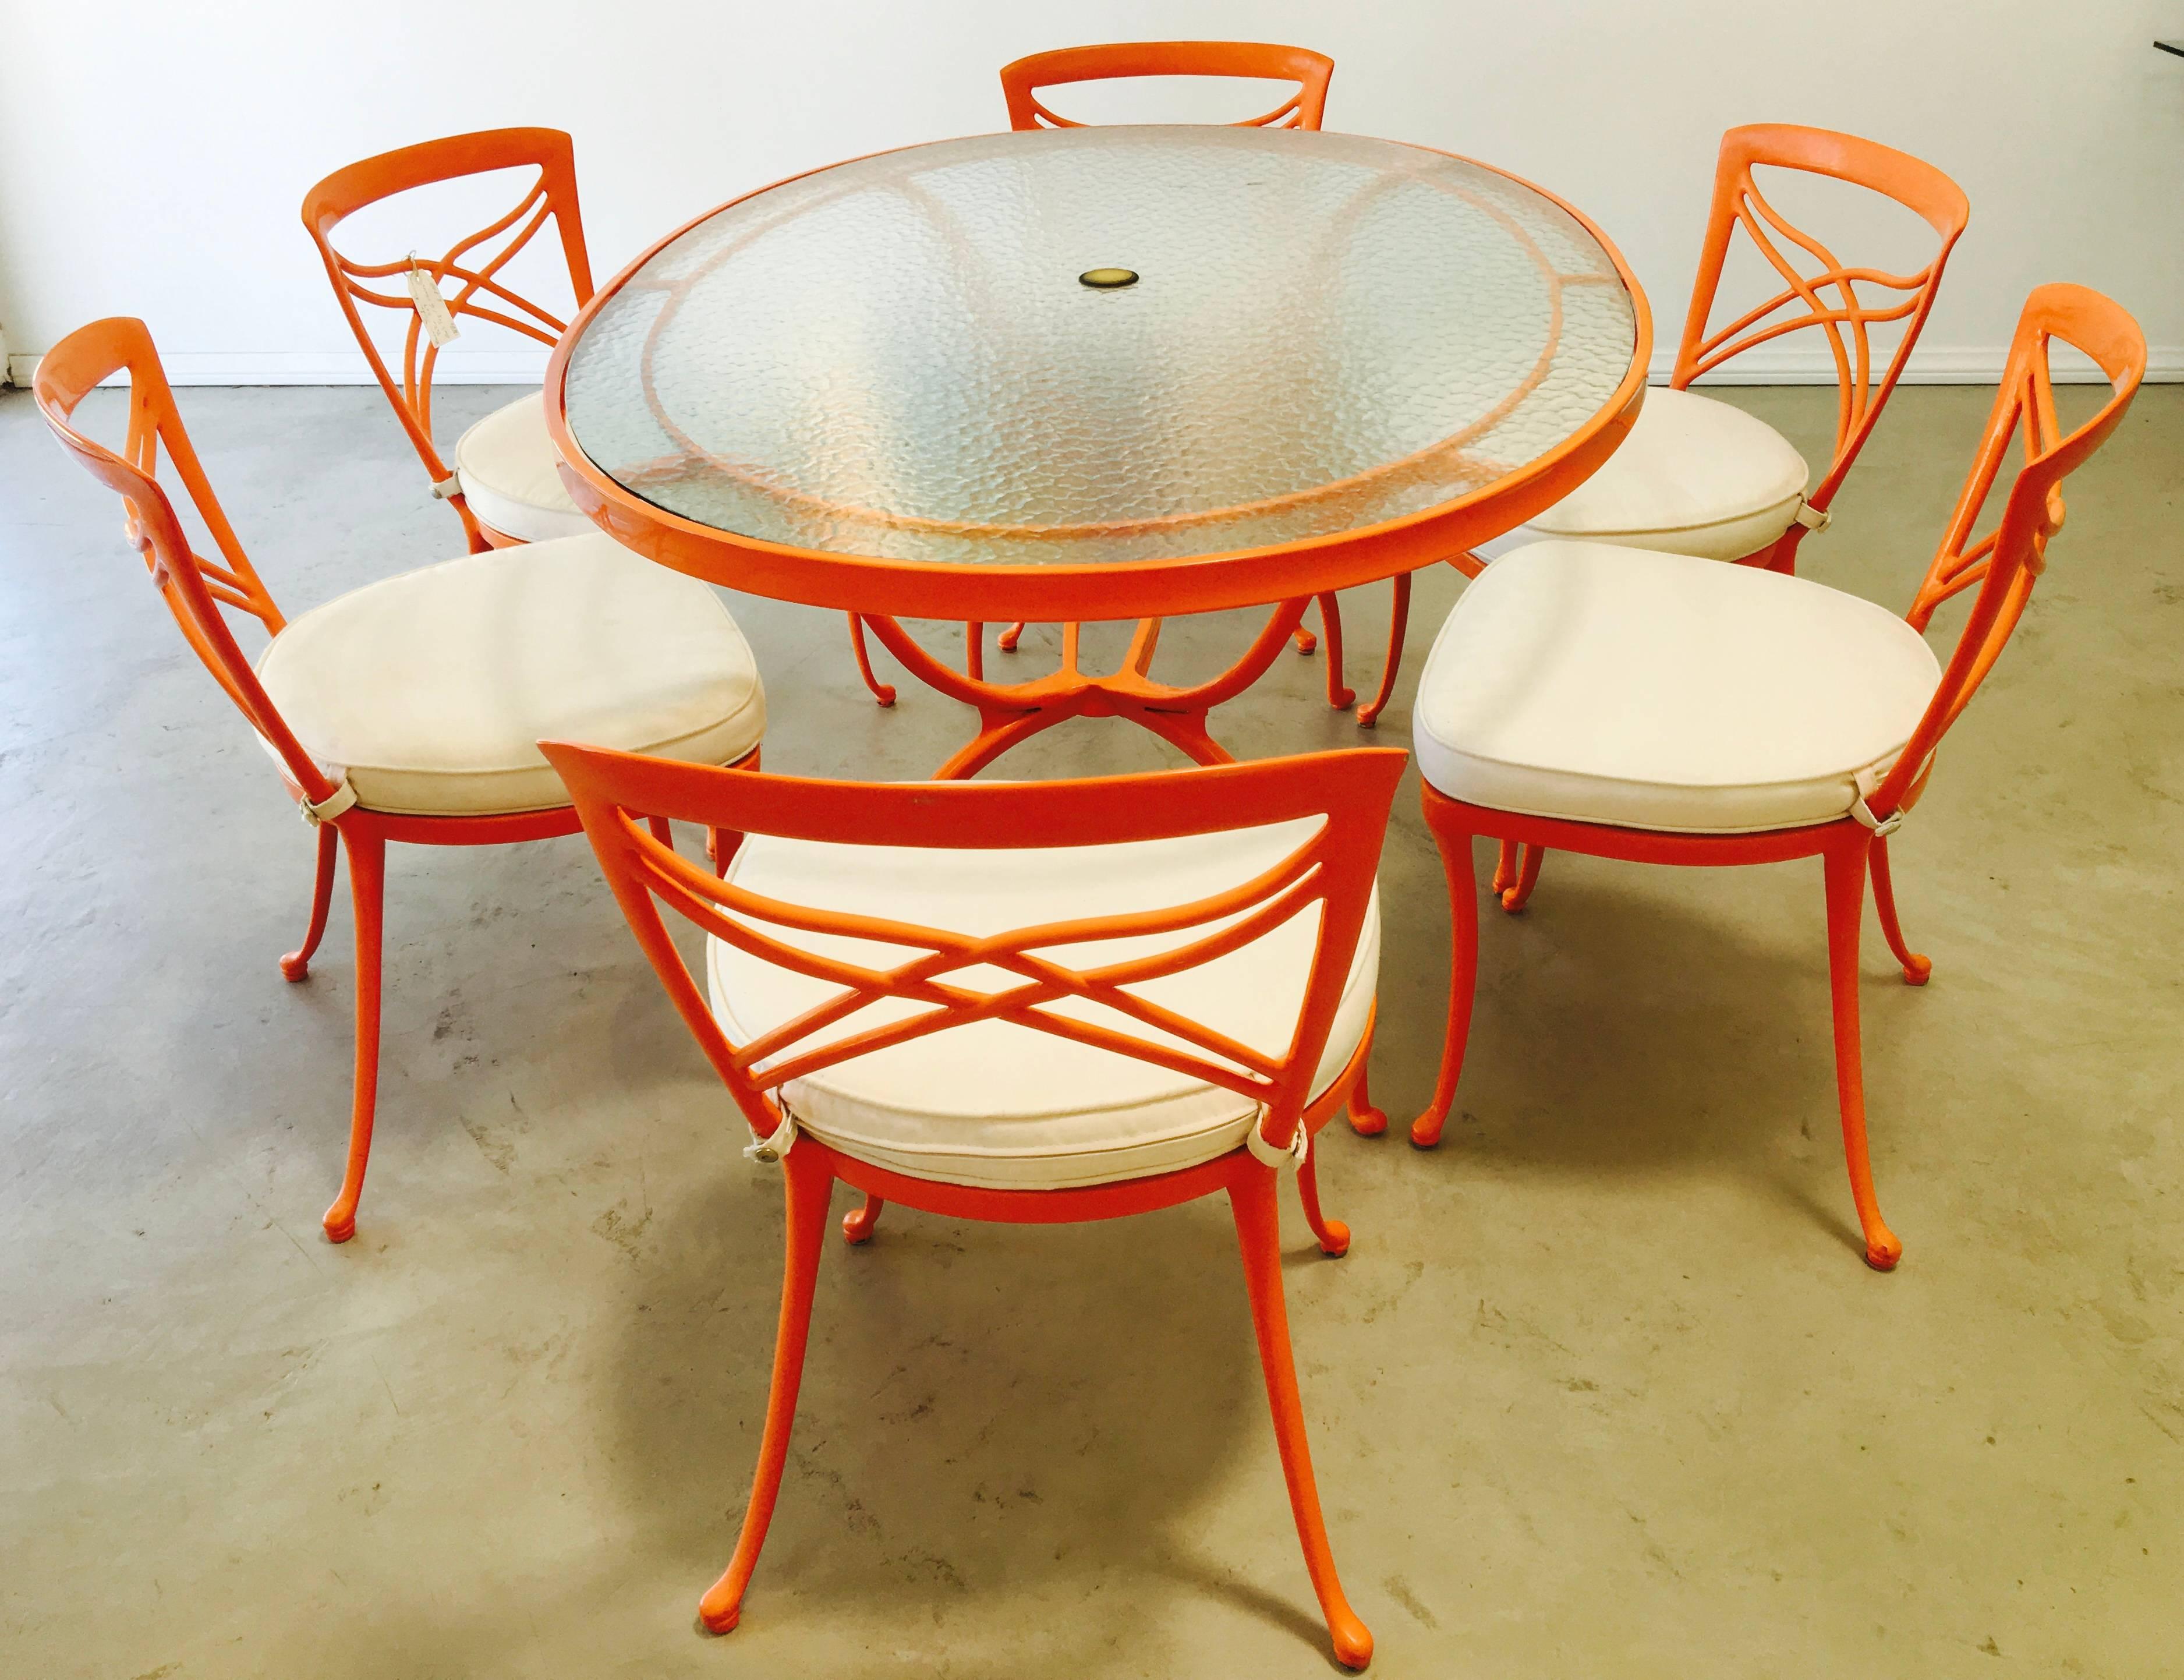 1960s oval patio dining set with six chairs by Brown Jordan is a striking example of Mid-Century Modern Hollywood Regency design. Orange enamel frames pair nicely with off-white washable canvas seat cushions, and the bubble glass top has an opening